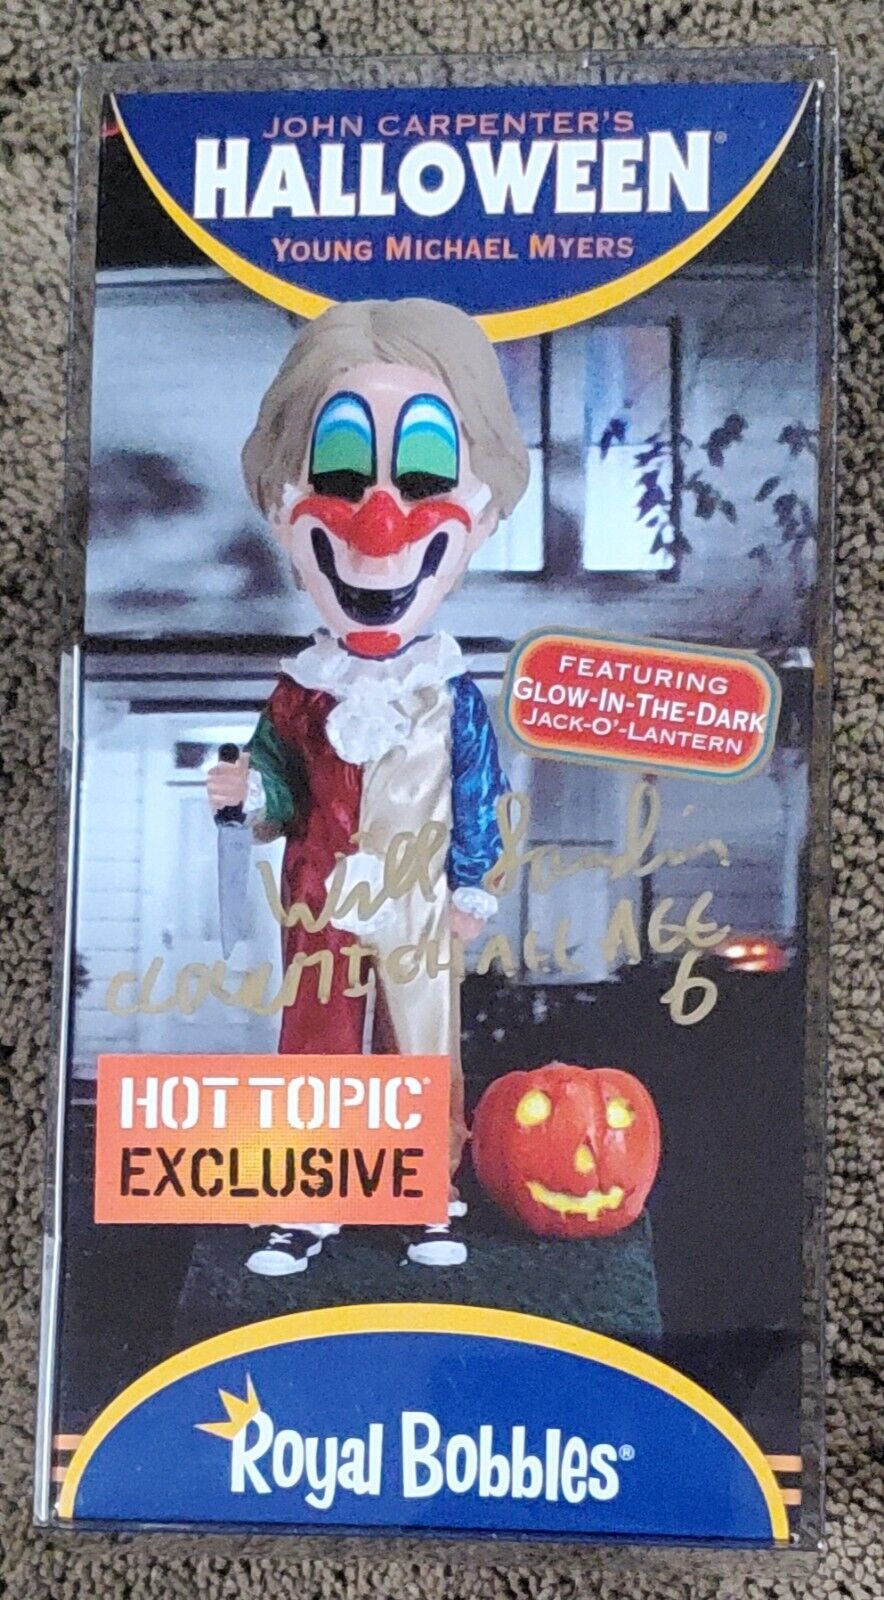 Royal Bobbles HALLOWEEN 1978 Young Michael Myers Signed Will Sandin JSA Figure